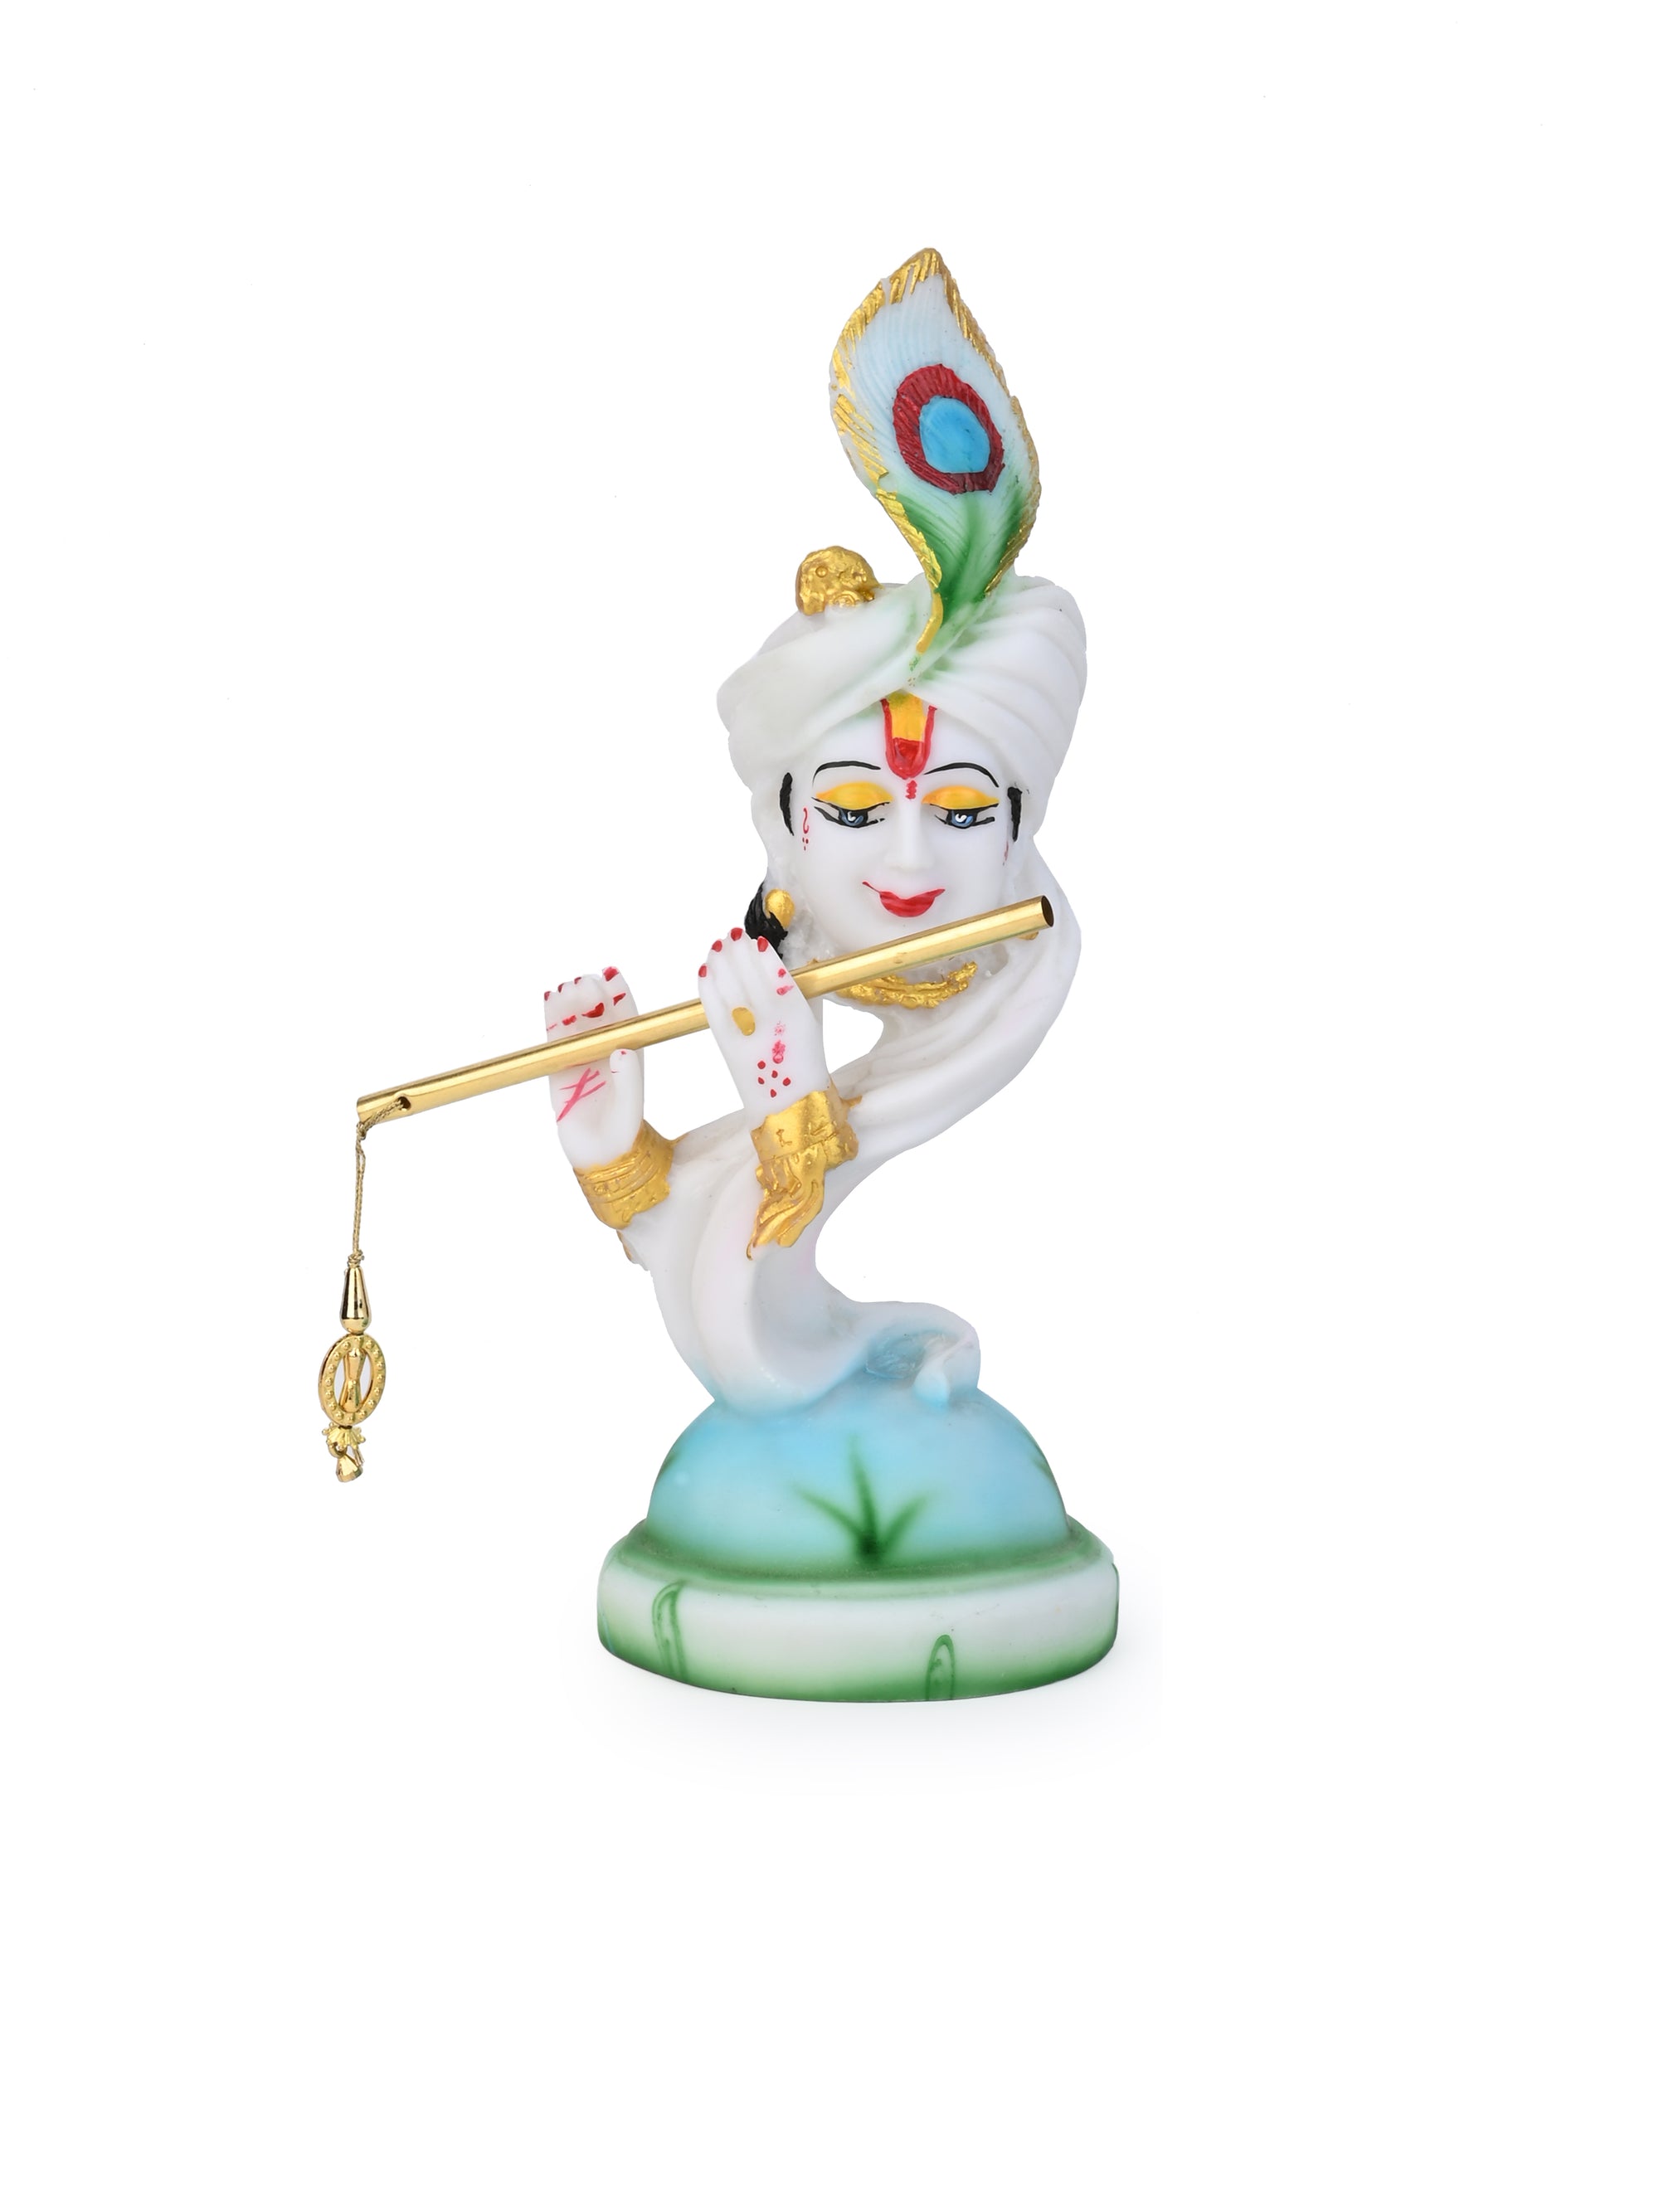 White and Blue Resin Crafted Modern Design Lord Krishna Statue - 12 inches